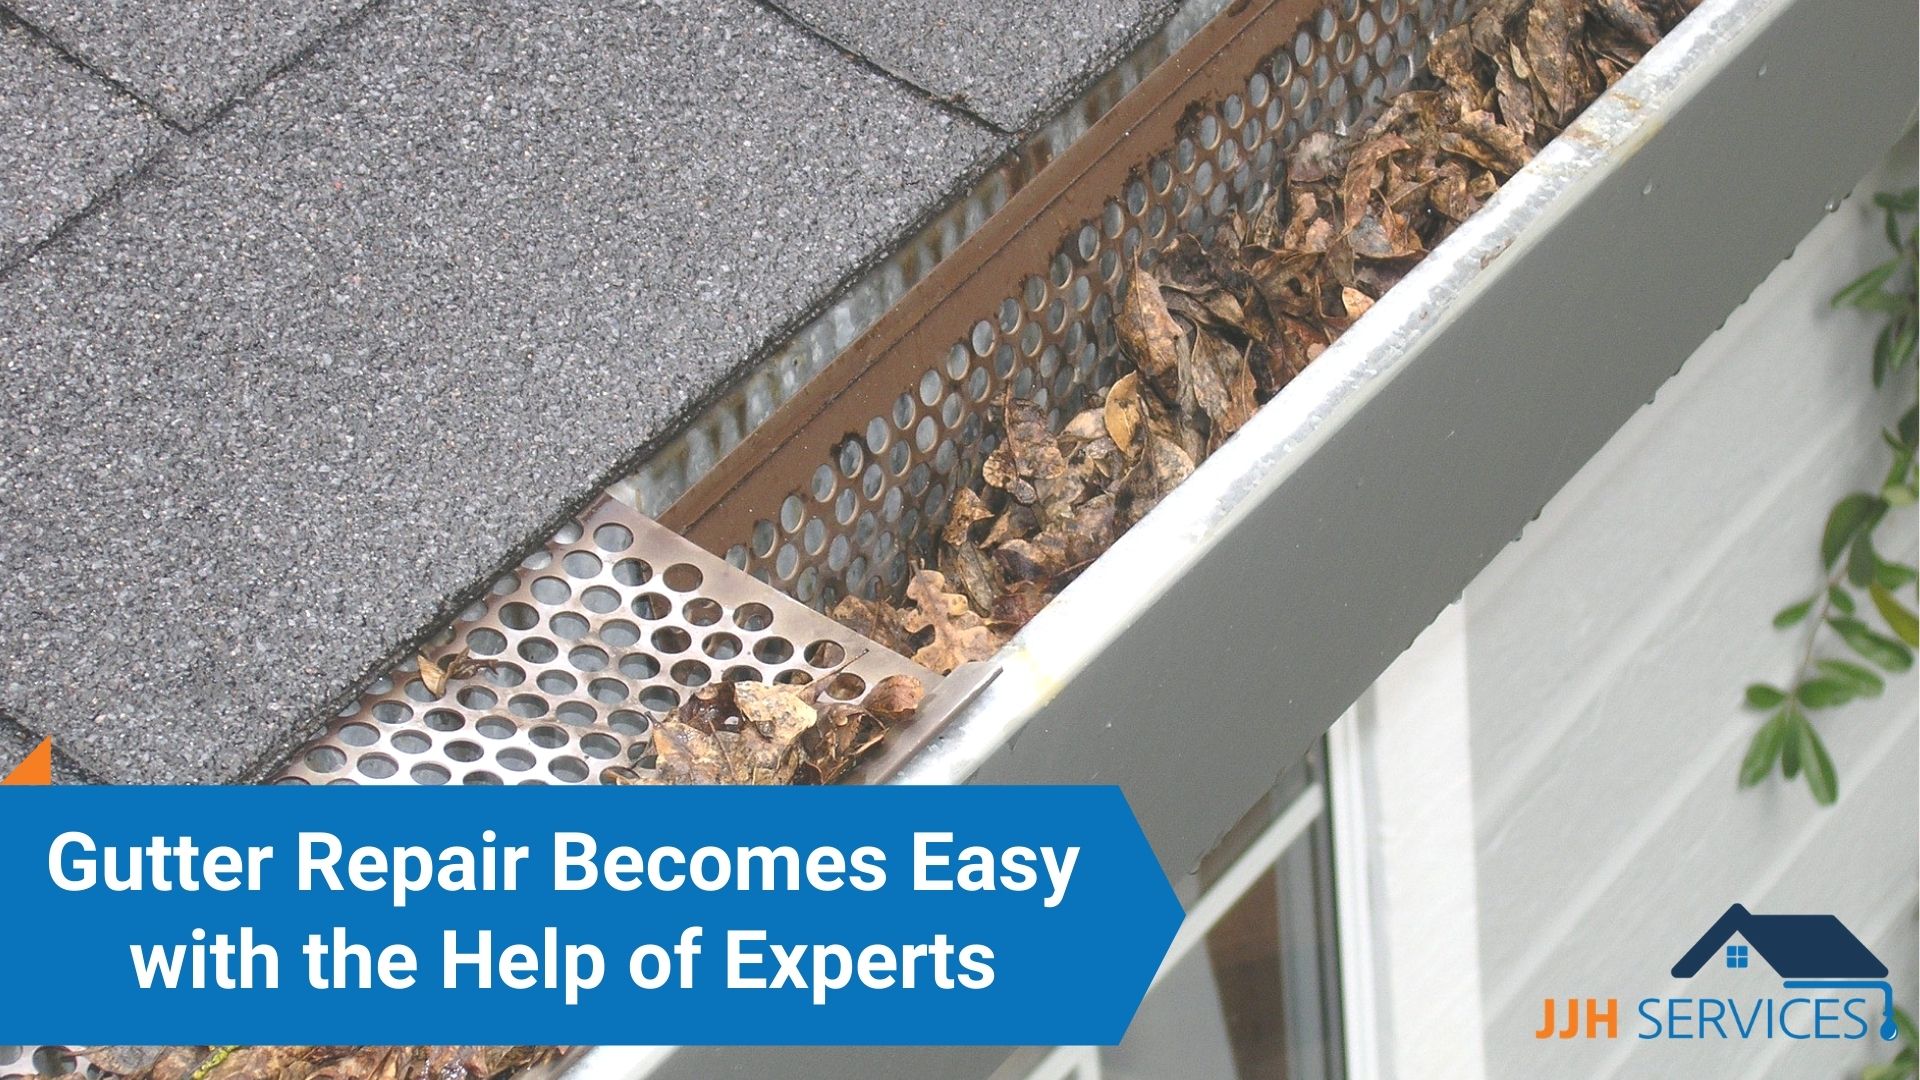 Gutter Repair Becomes Easy with the Help of Experts